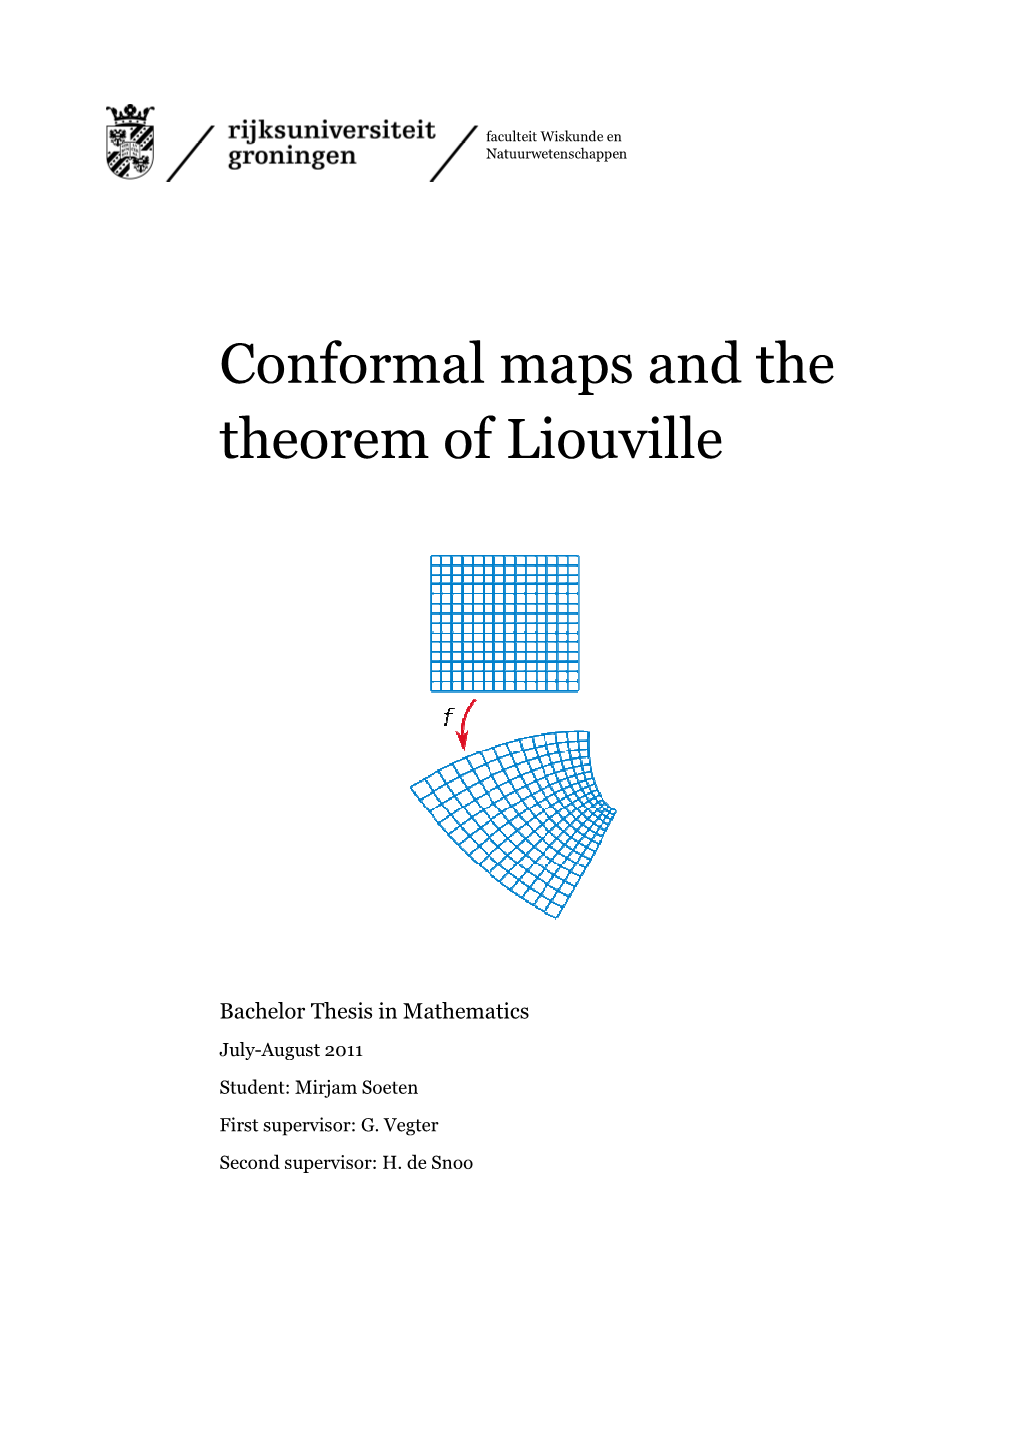 Conformal Maps and the Theorem of Liouville